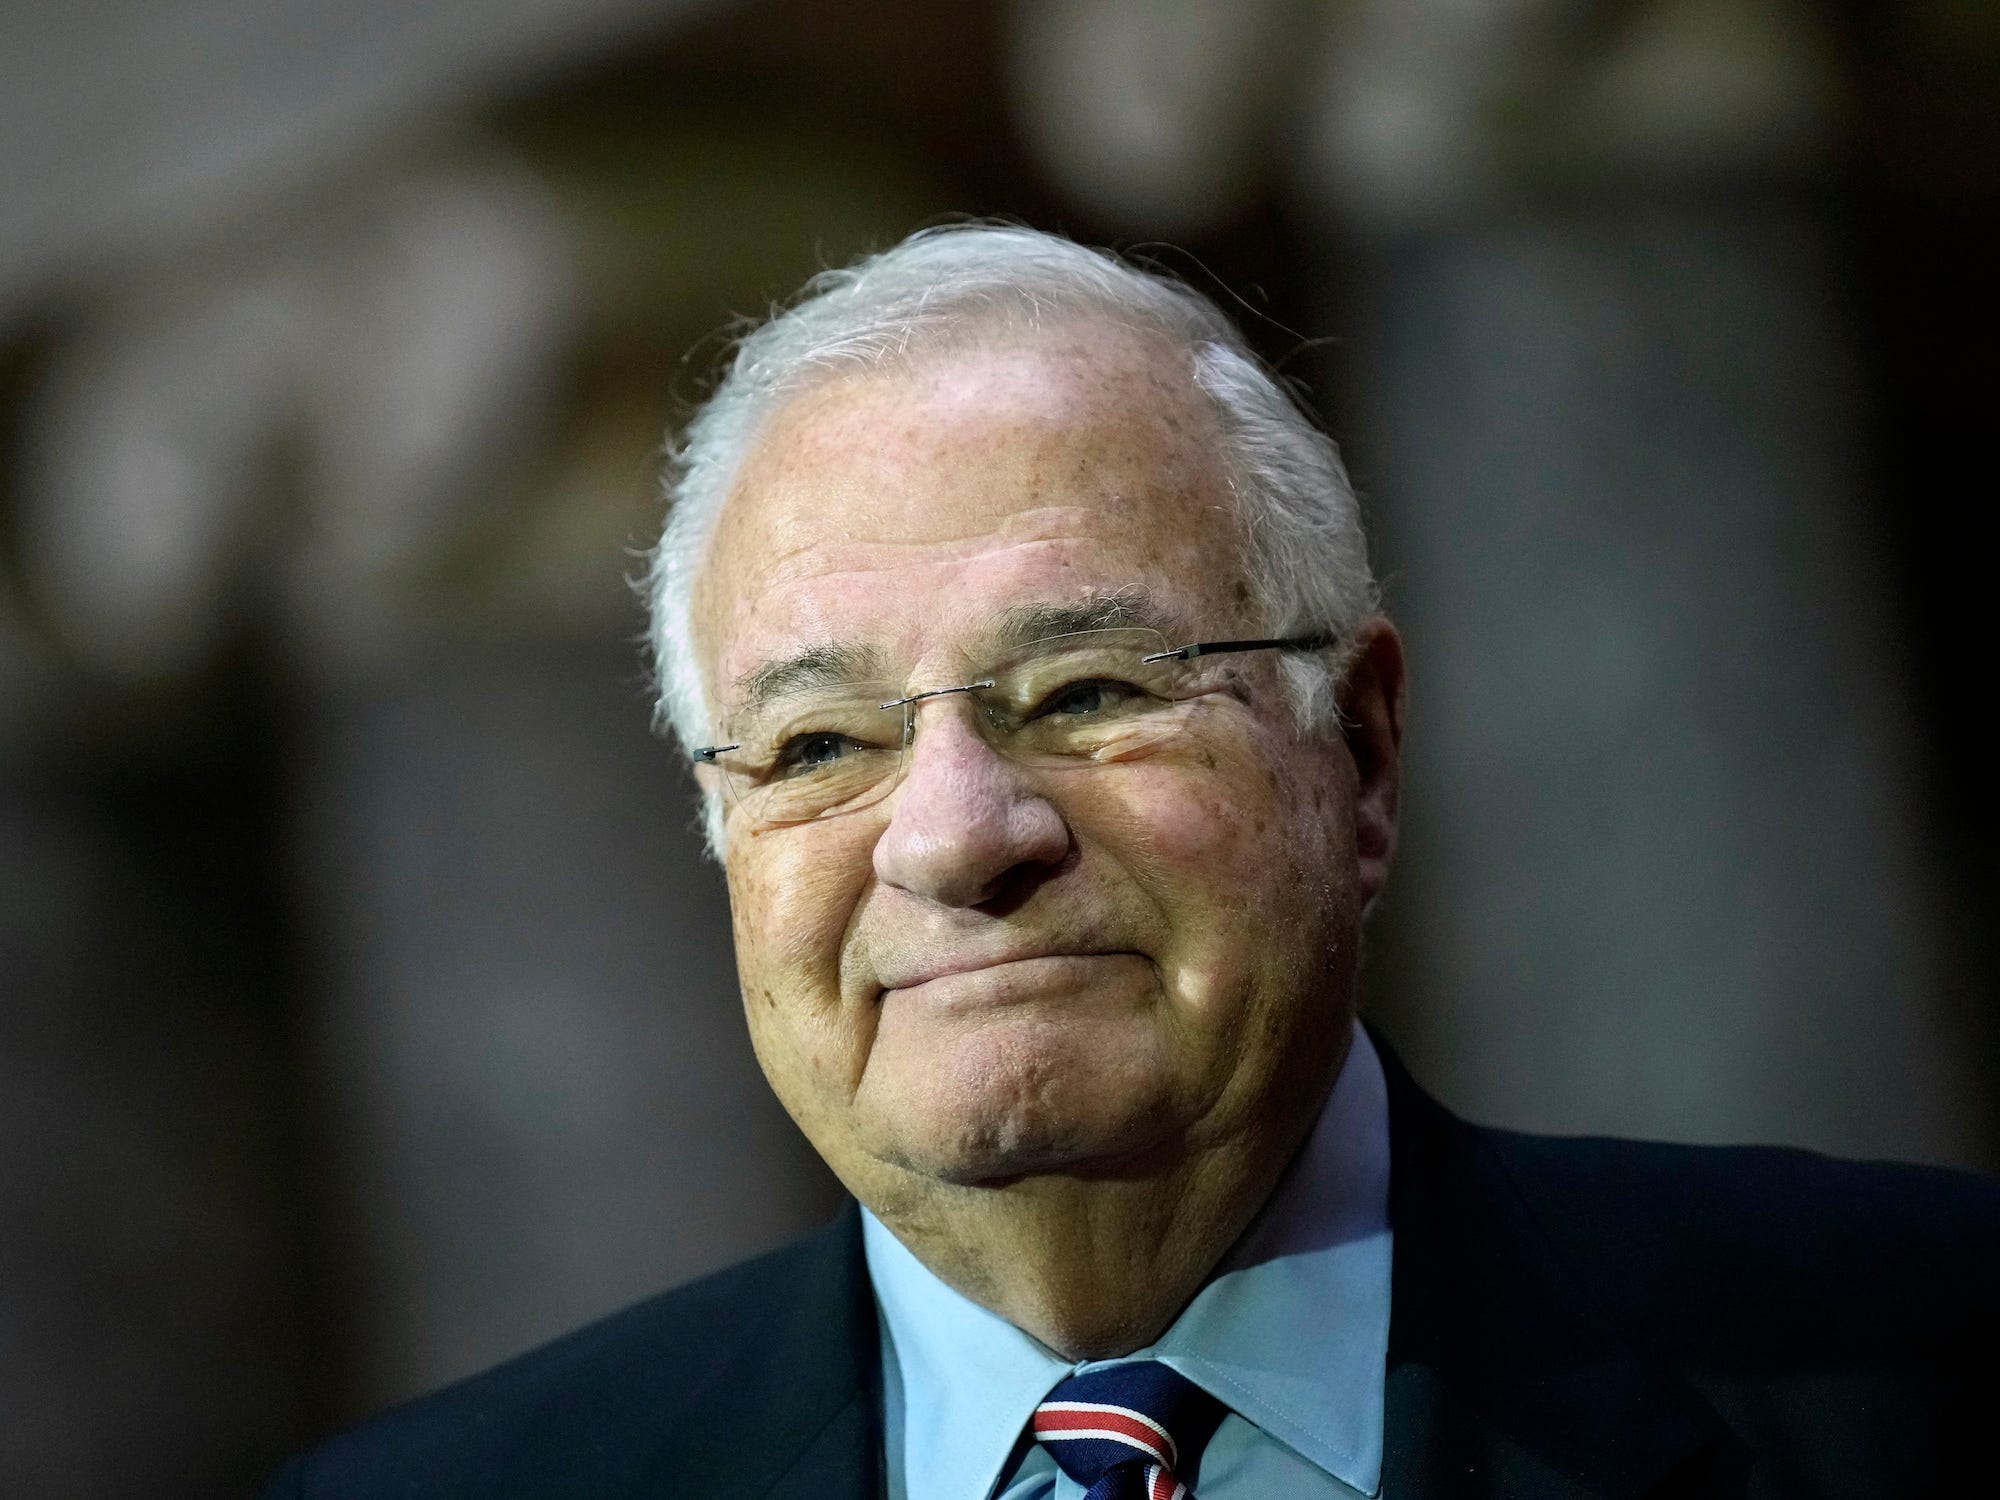 <p>Joe Ricketts, the <a href="https://www.businessinsider.com/joe-ricketts-book-first-job-janitor-founded-ameritrade-2019-11">founder and former CEO of TD Ameritrade</a>, has given $824,600 to the Trump 47 Committee. His wife, Marleen, gave $814,600.</p><p>In 2019, Ricketts — whose family owns the Chicago Cubs — was <a href="https://www.cnn.com/2019/02/06/us/sports-franchises-racist-intolerant-statements/index.html?no-st=1549561834">found to have sent</a> racist and Islamophobic emails during the 2012 election, for which he later apologized.</p><p>"Christians and Jews can have a mutual respect for each other to create a civil society. As you know, Islam cannot do that," Ricketts wrote in one 2012 email. "Therefore we cannot ever let Islam become a large part of our society. Muslims are naturally my (our) enemy due to their deep antagonism and bias against non-Muslims."</p><p>Last year, one of Ricketts' sons — former Nebraska Gov. Pete Ricketts — was <a href="https://www.businessinsider.com/pete-ricketts-wealthy-family-us-senate-republicans-nebraska-2023-1">appointed to the US Senate</a> after former Sen. Ben Sasse opted to retire.</p><p>The younger Ricketts is likely to be elected to the remainder of Sasse's term in November.</p>